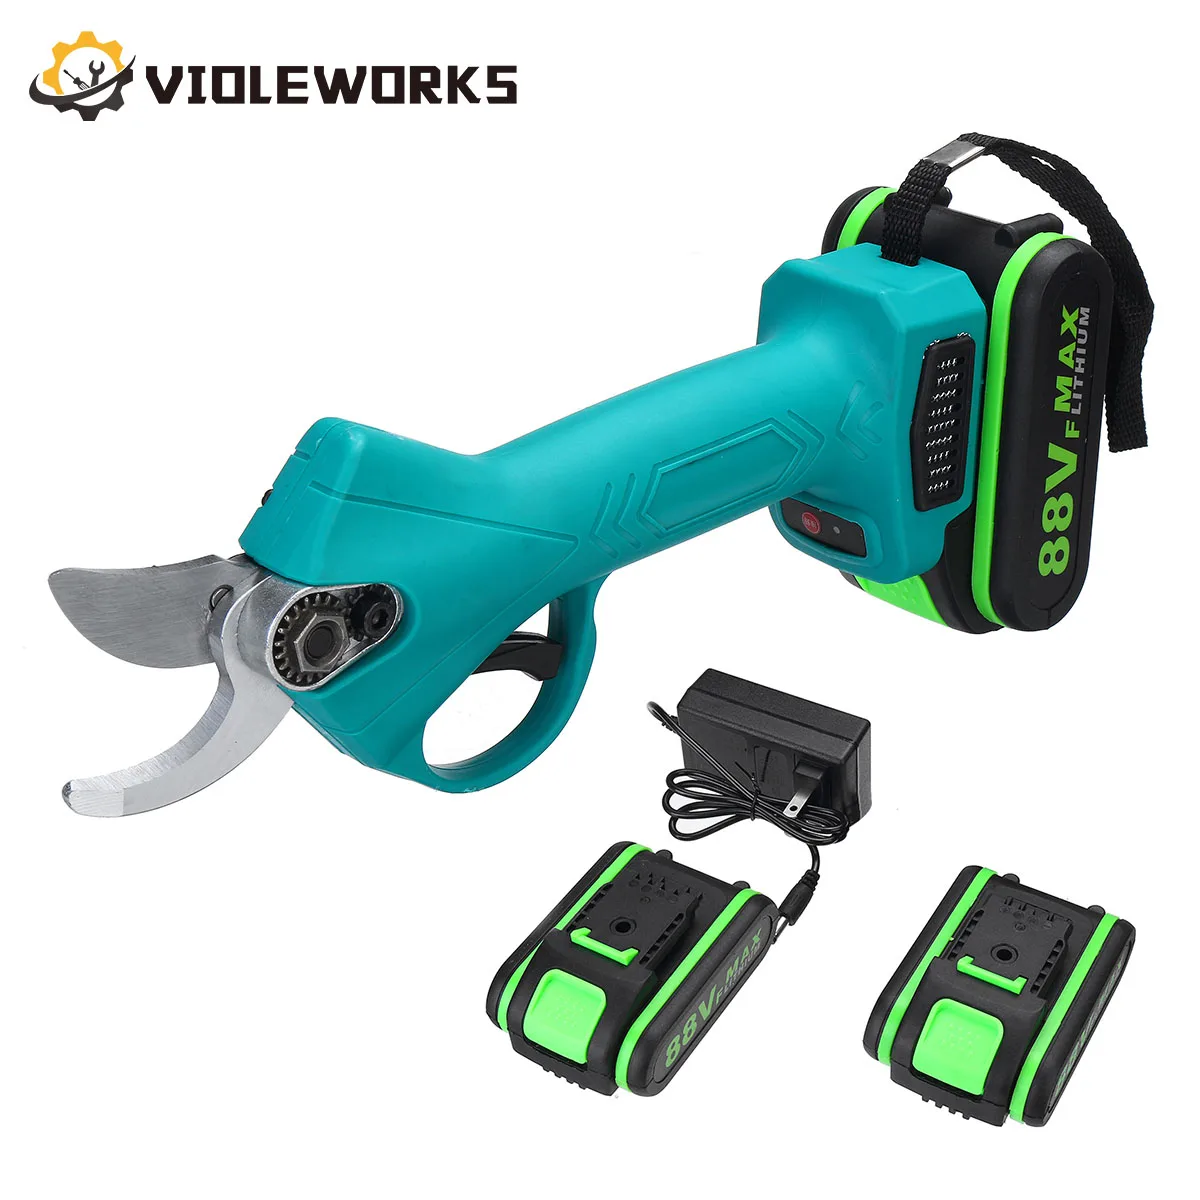 88V Cordless Electric Pruning Shears Secateur Garden Branch Cutter with 2 